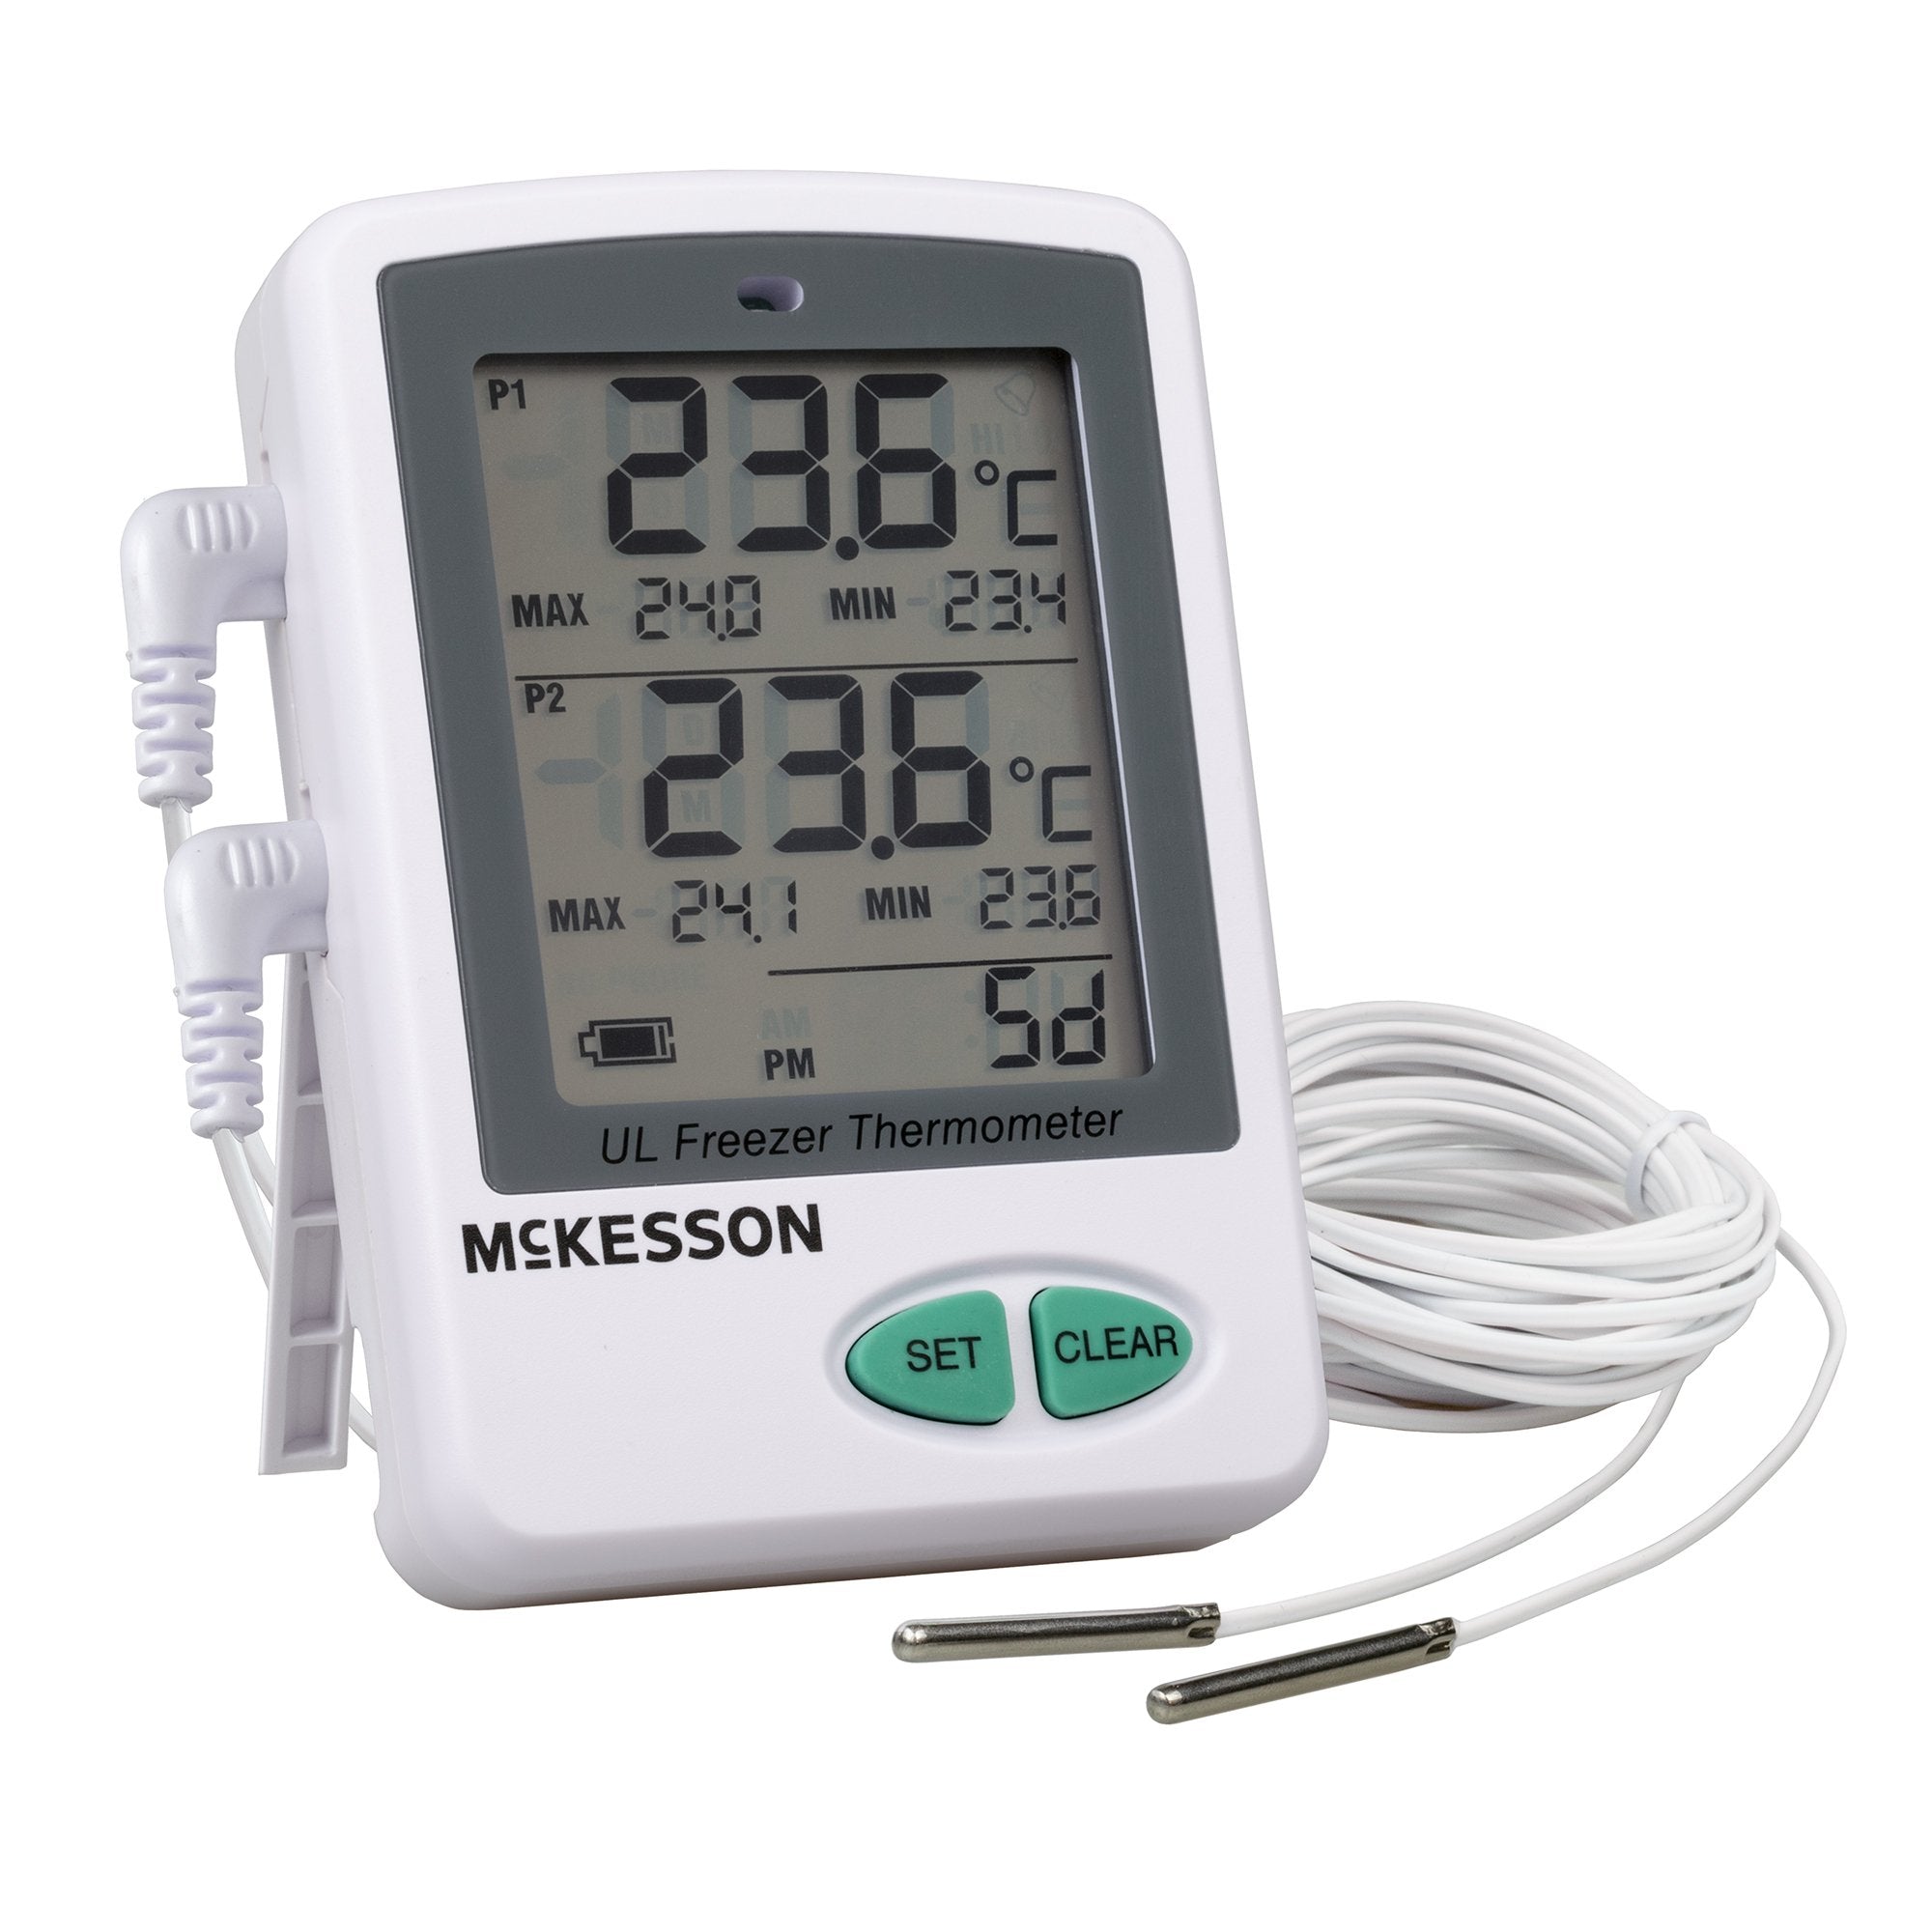 McKesson Brand - Thermometers and Hygrometers